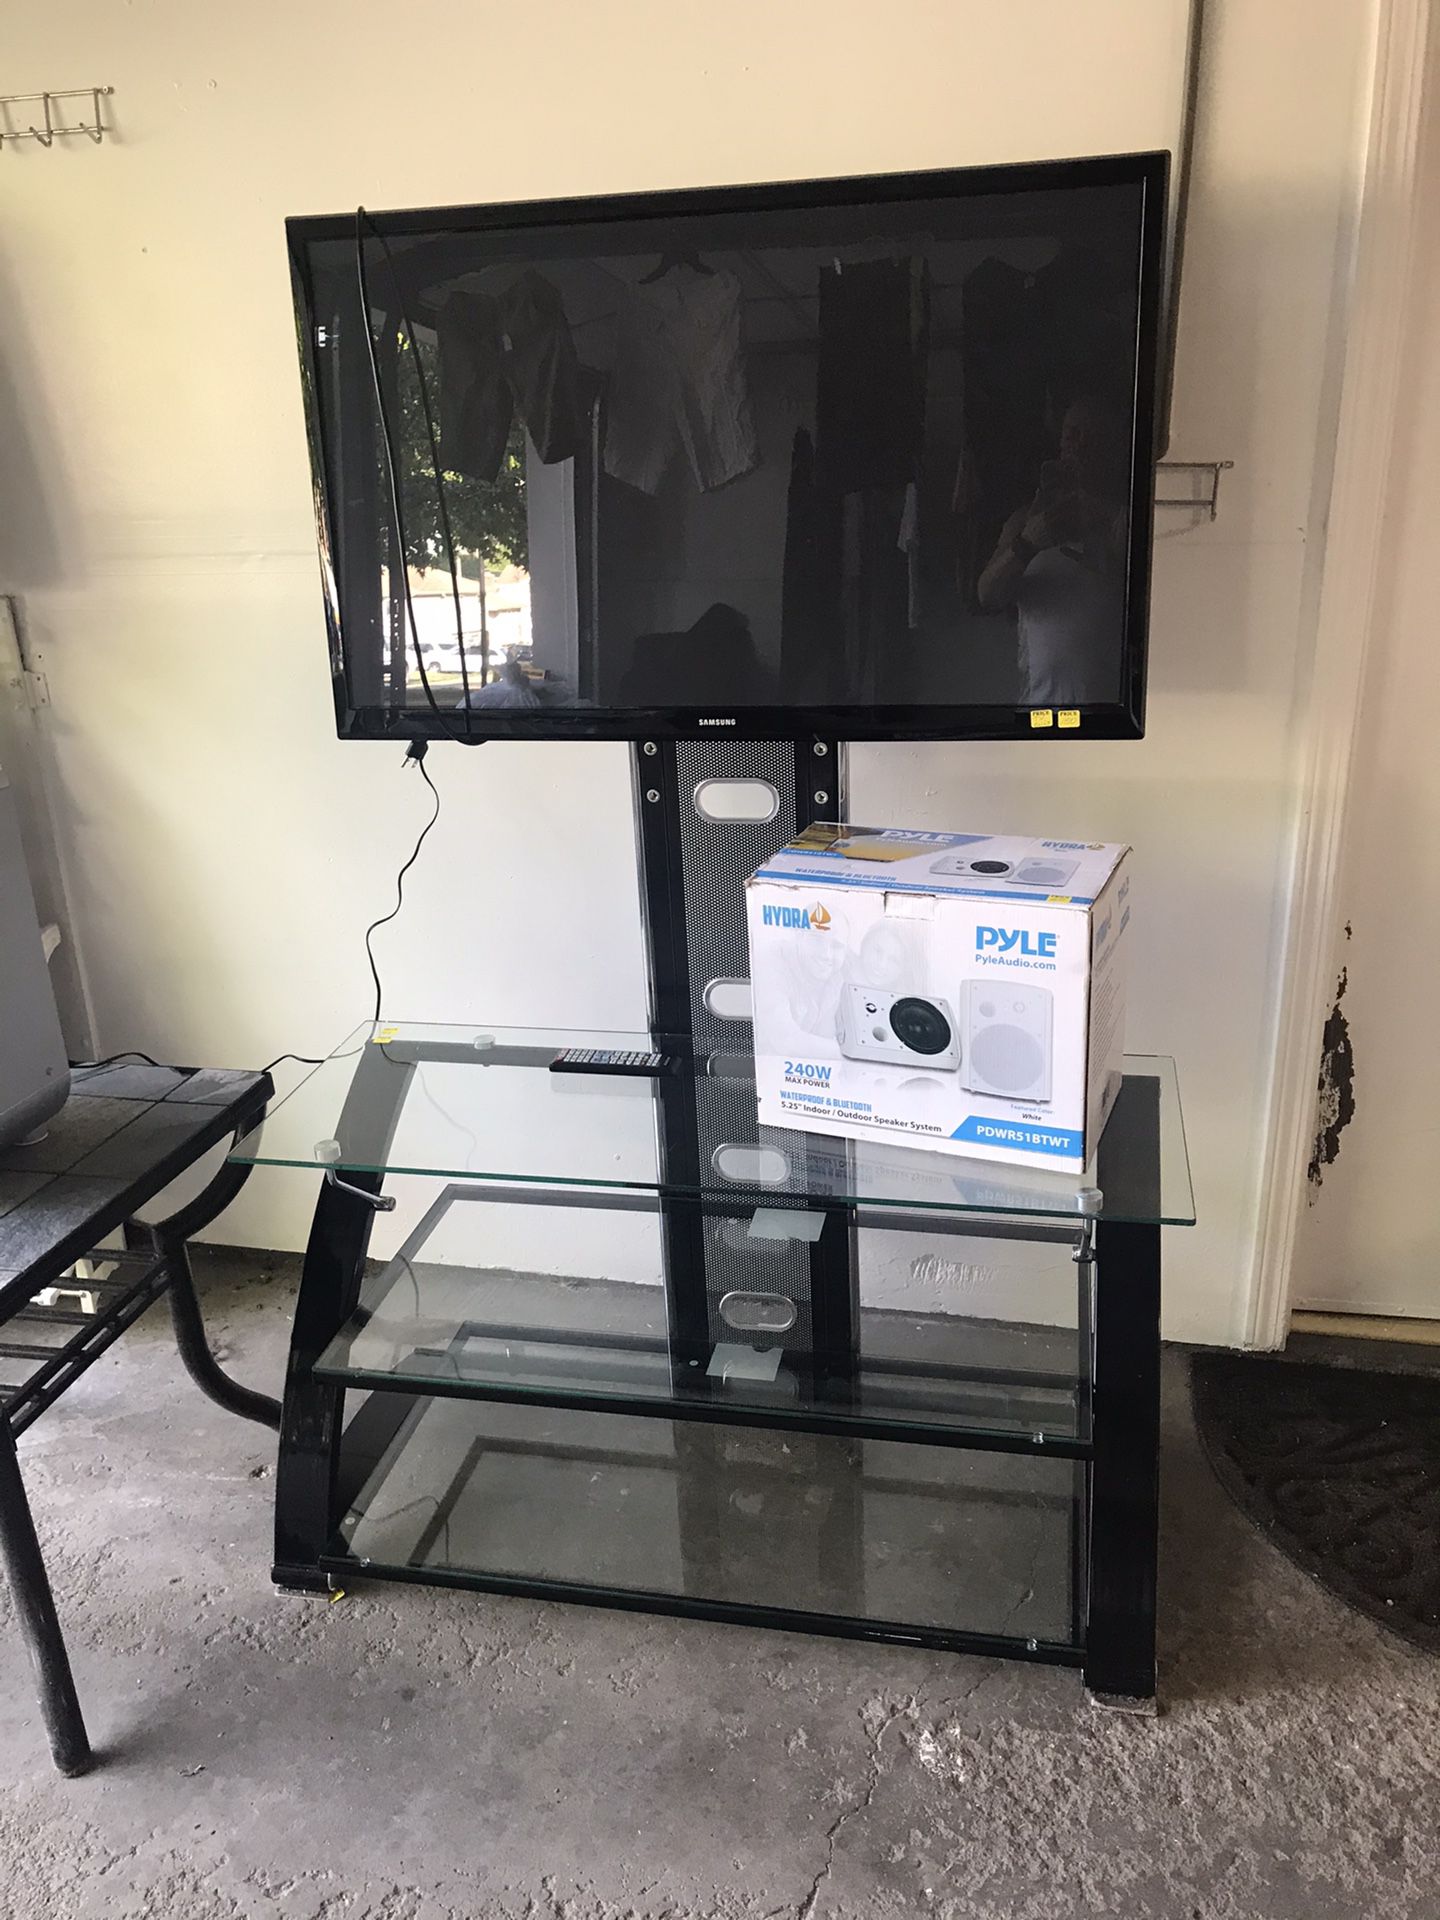 Tv glass stand and Samsung 40”tv.